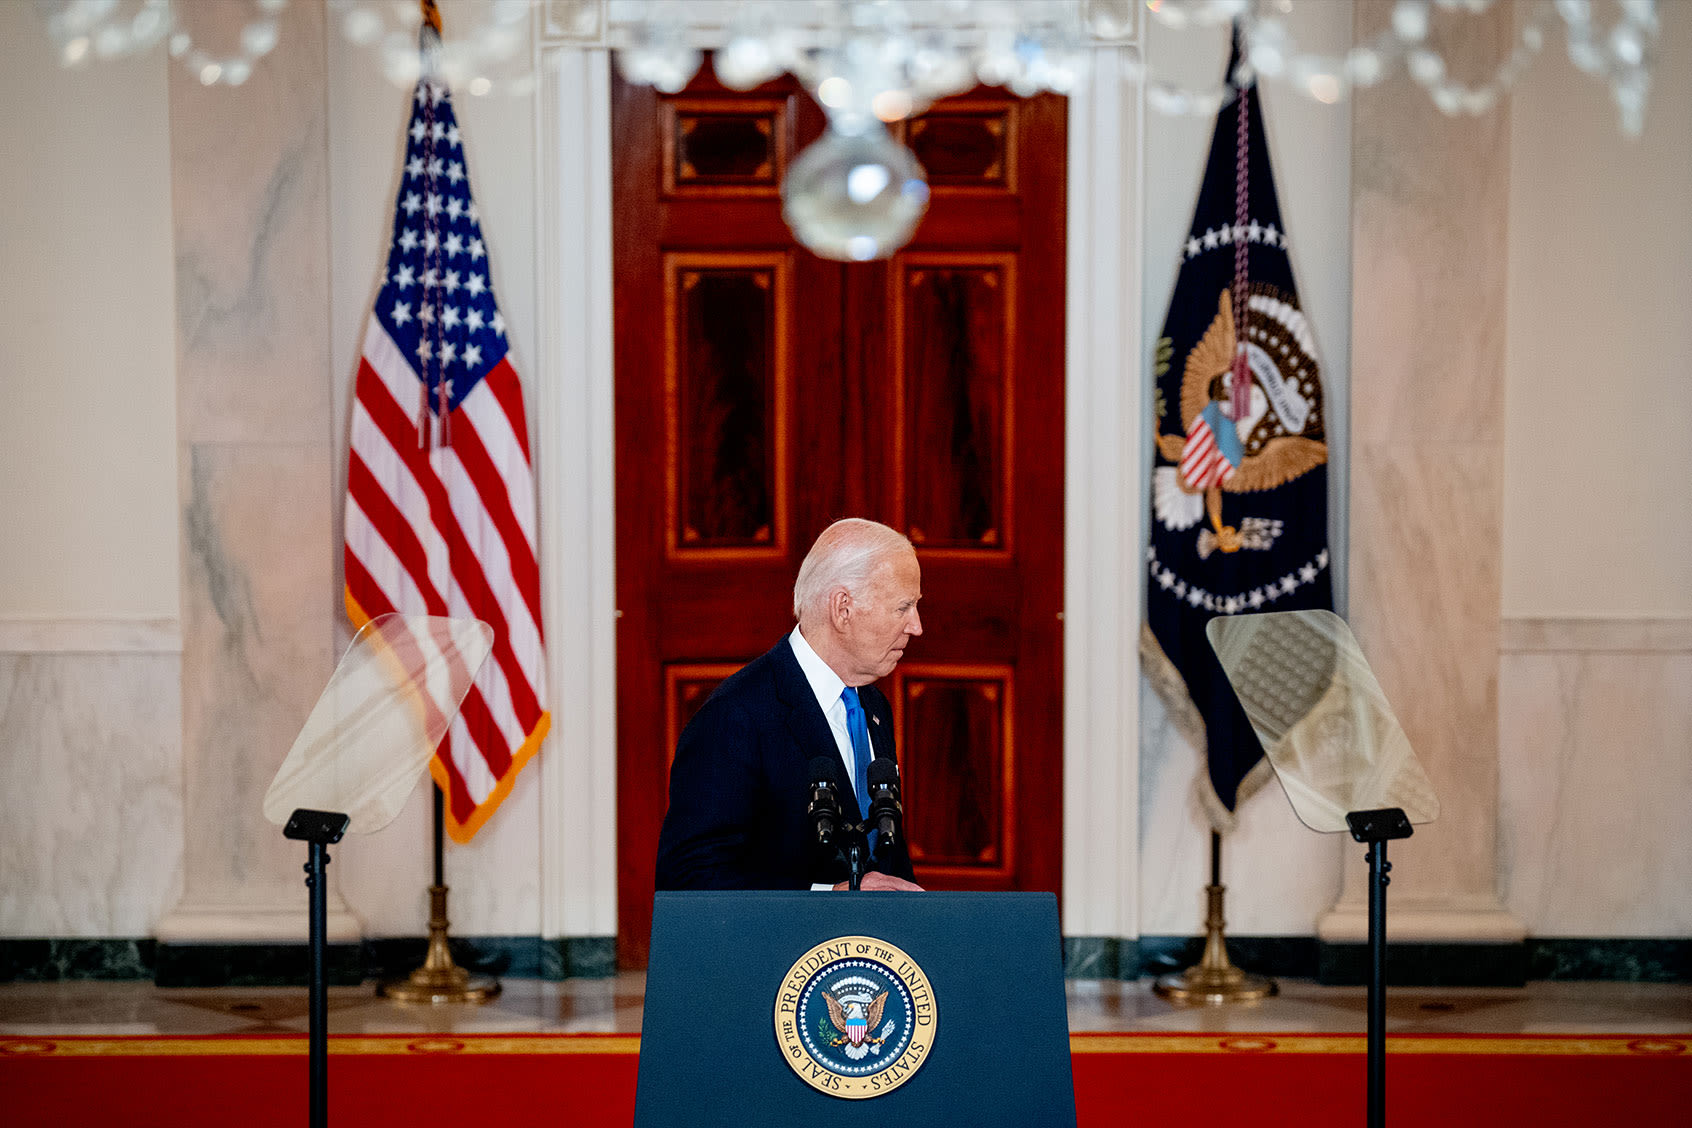 "Yes he's old, but he can do the job": Biden campaign insists he can win, but the end may be near